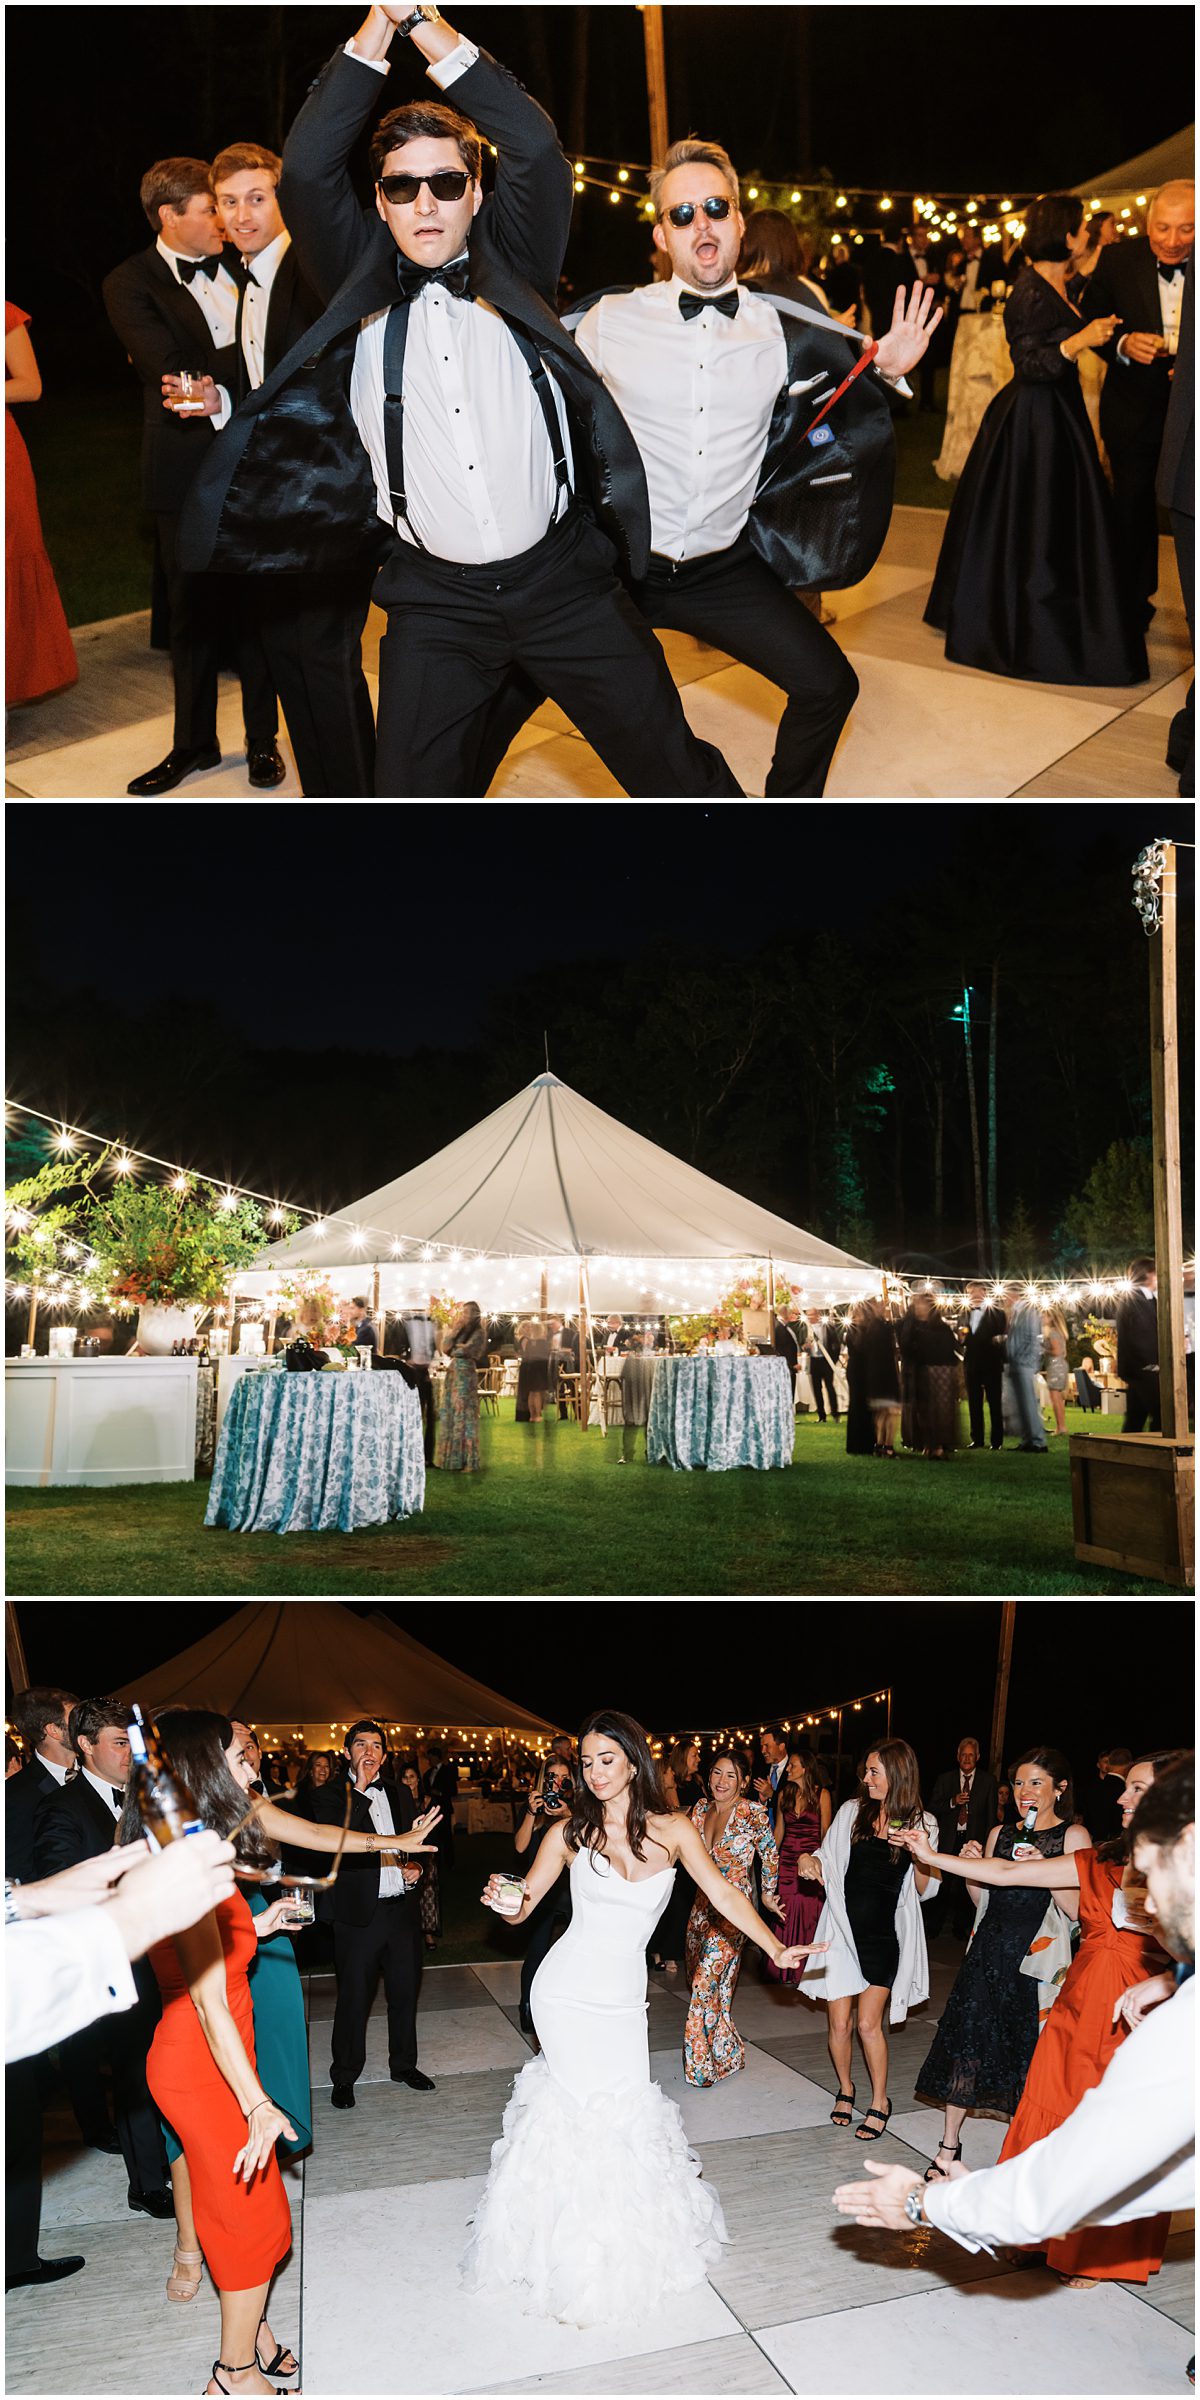 These fun groomsmen kicked off the fun on the dancefloor by acting silly